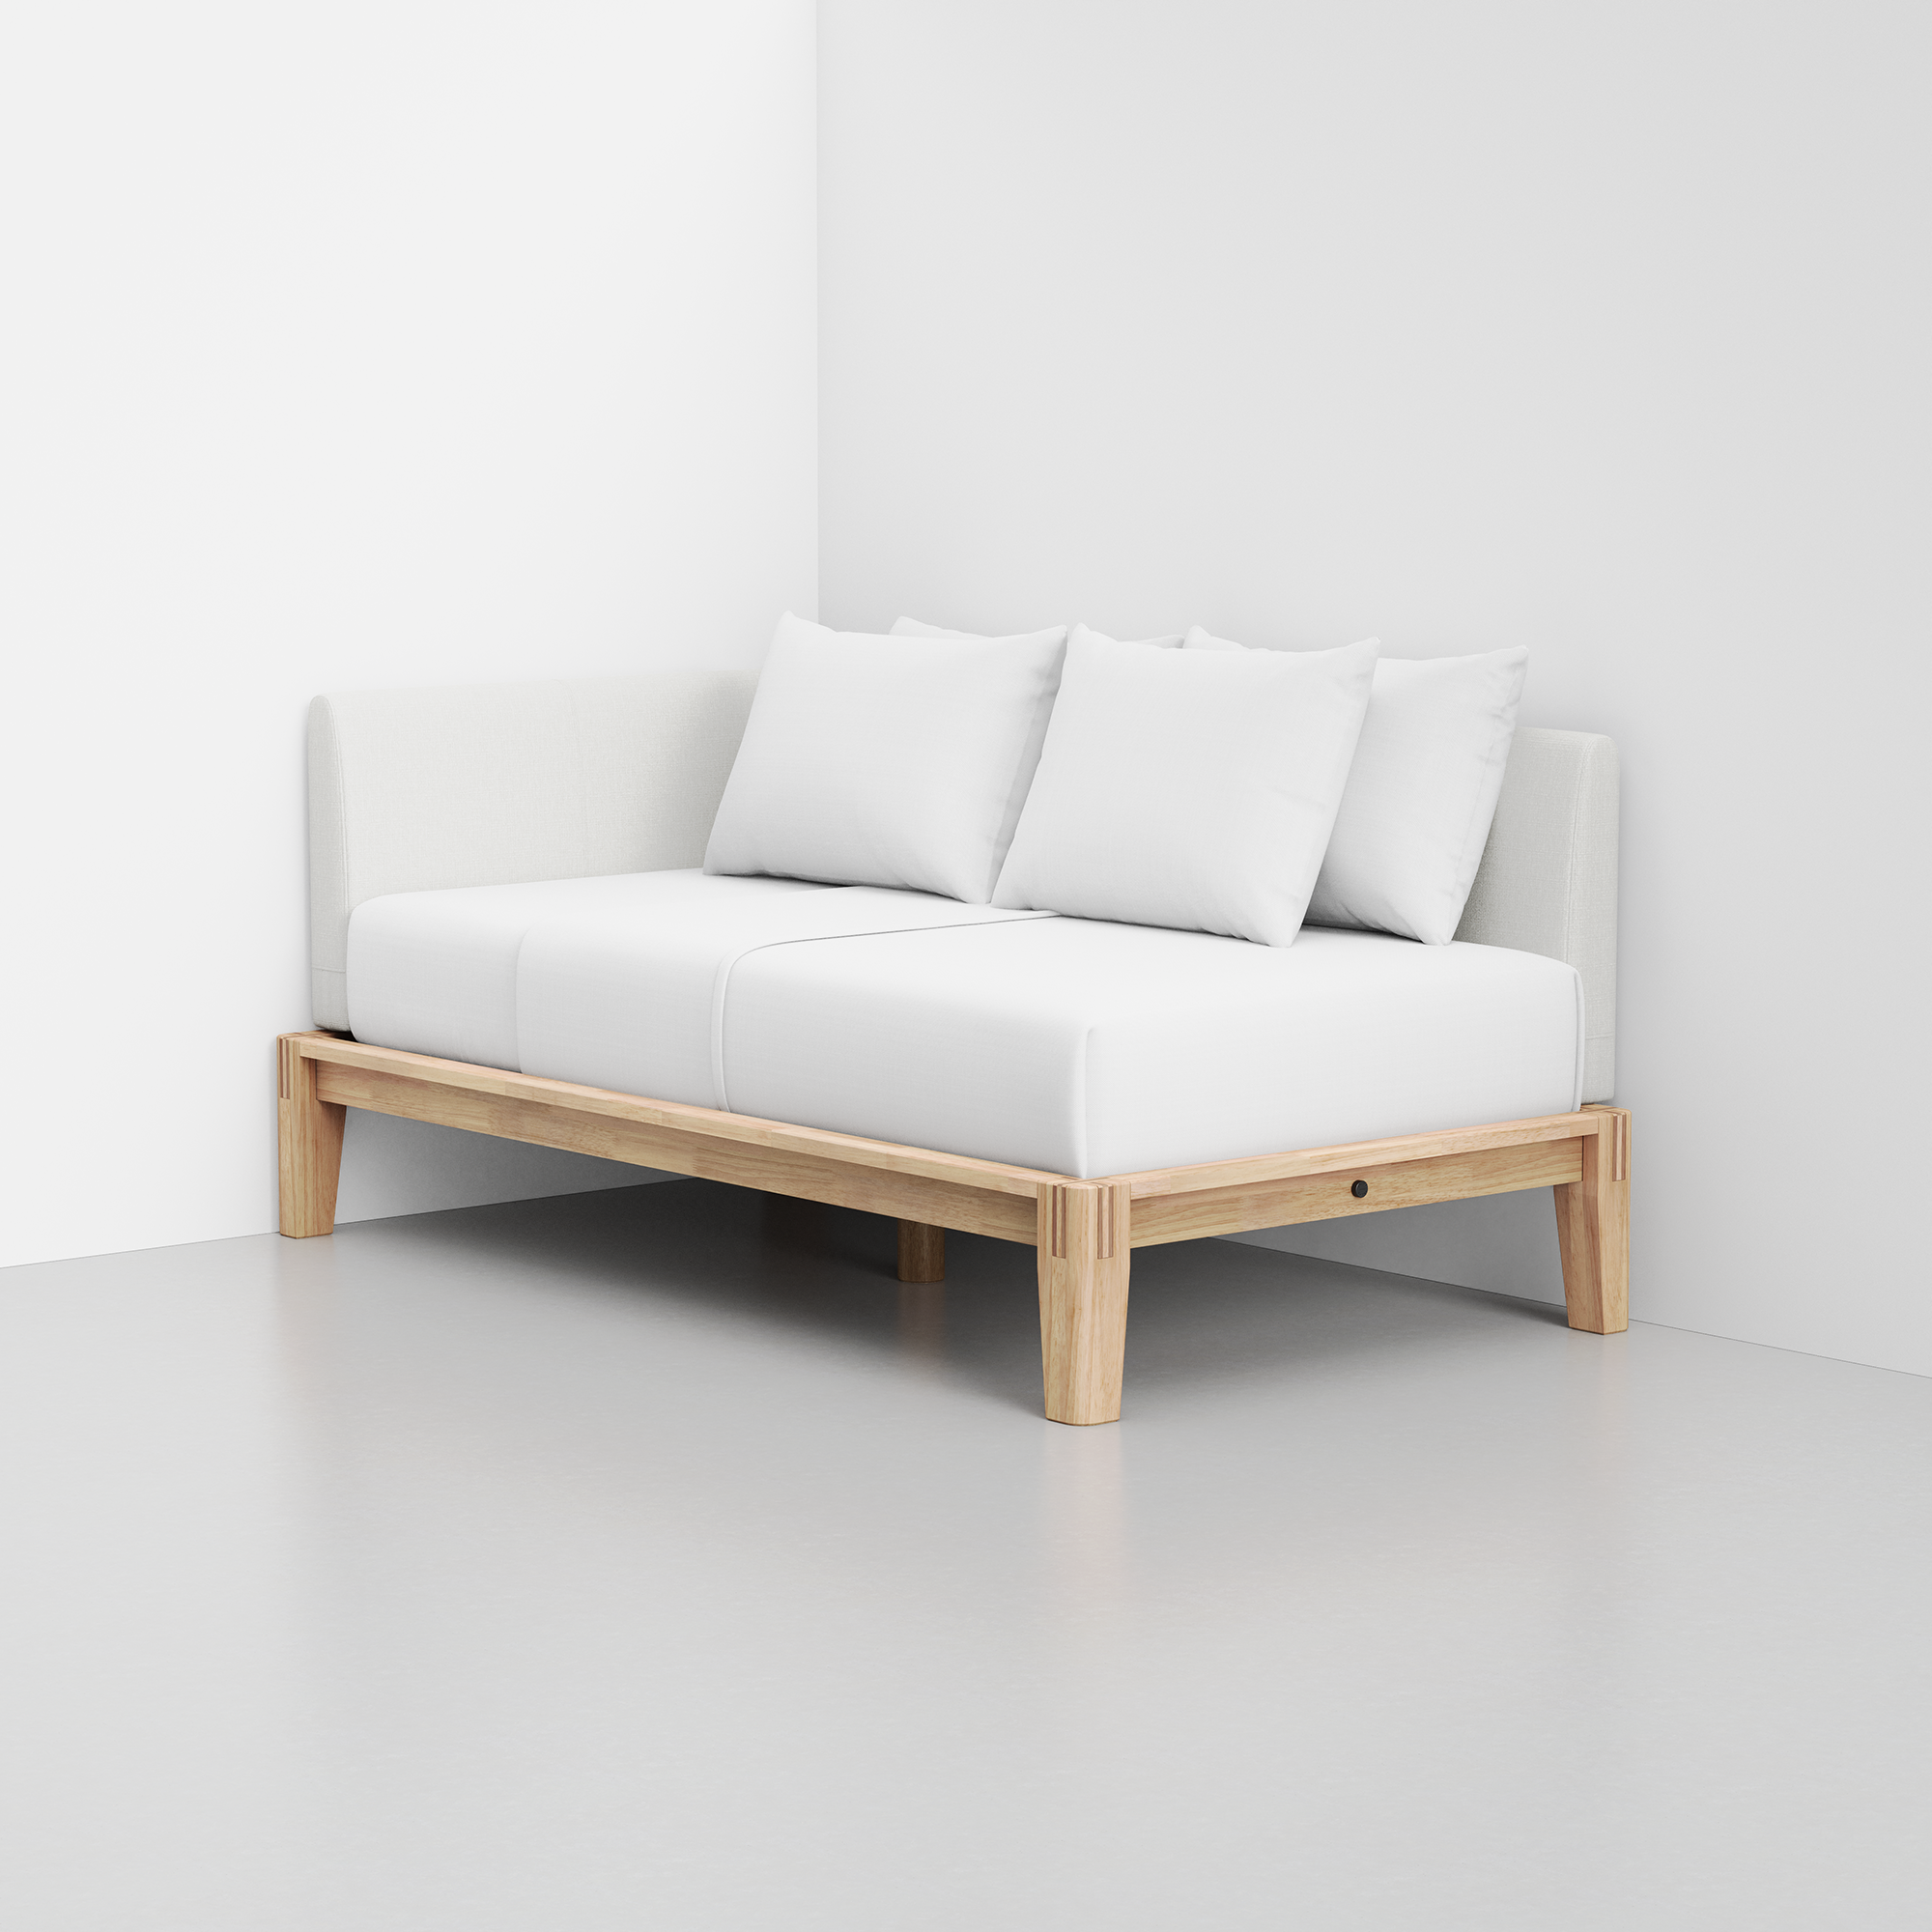 PDP Image: The Daybed (Natural / Light Linen) - Rendering - Pillows Stacked